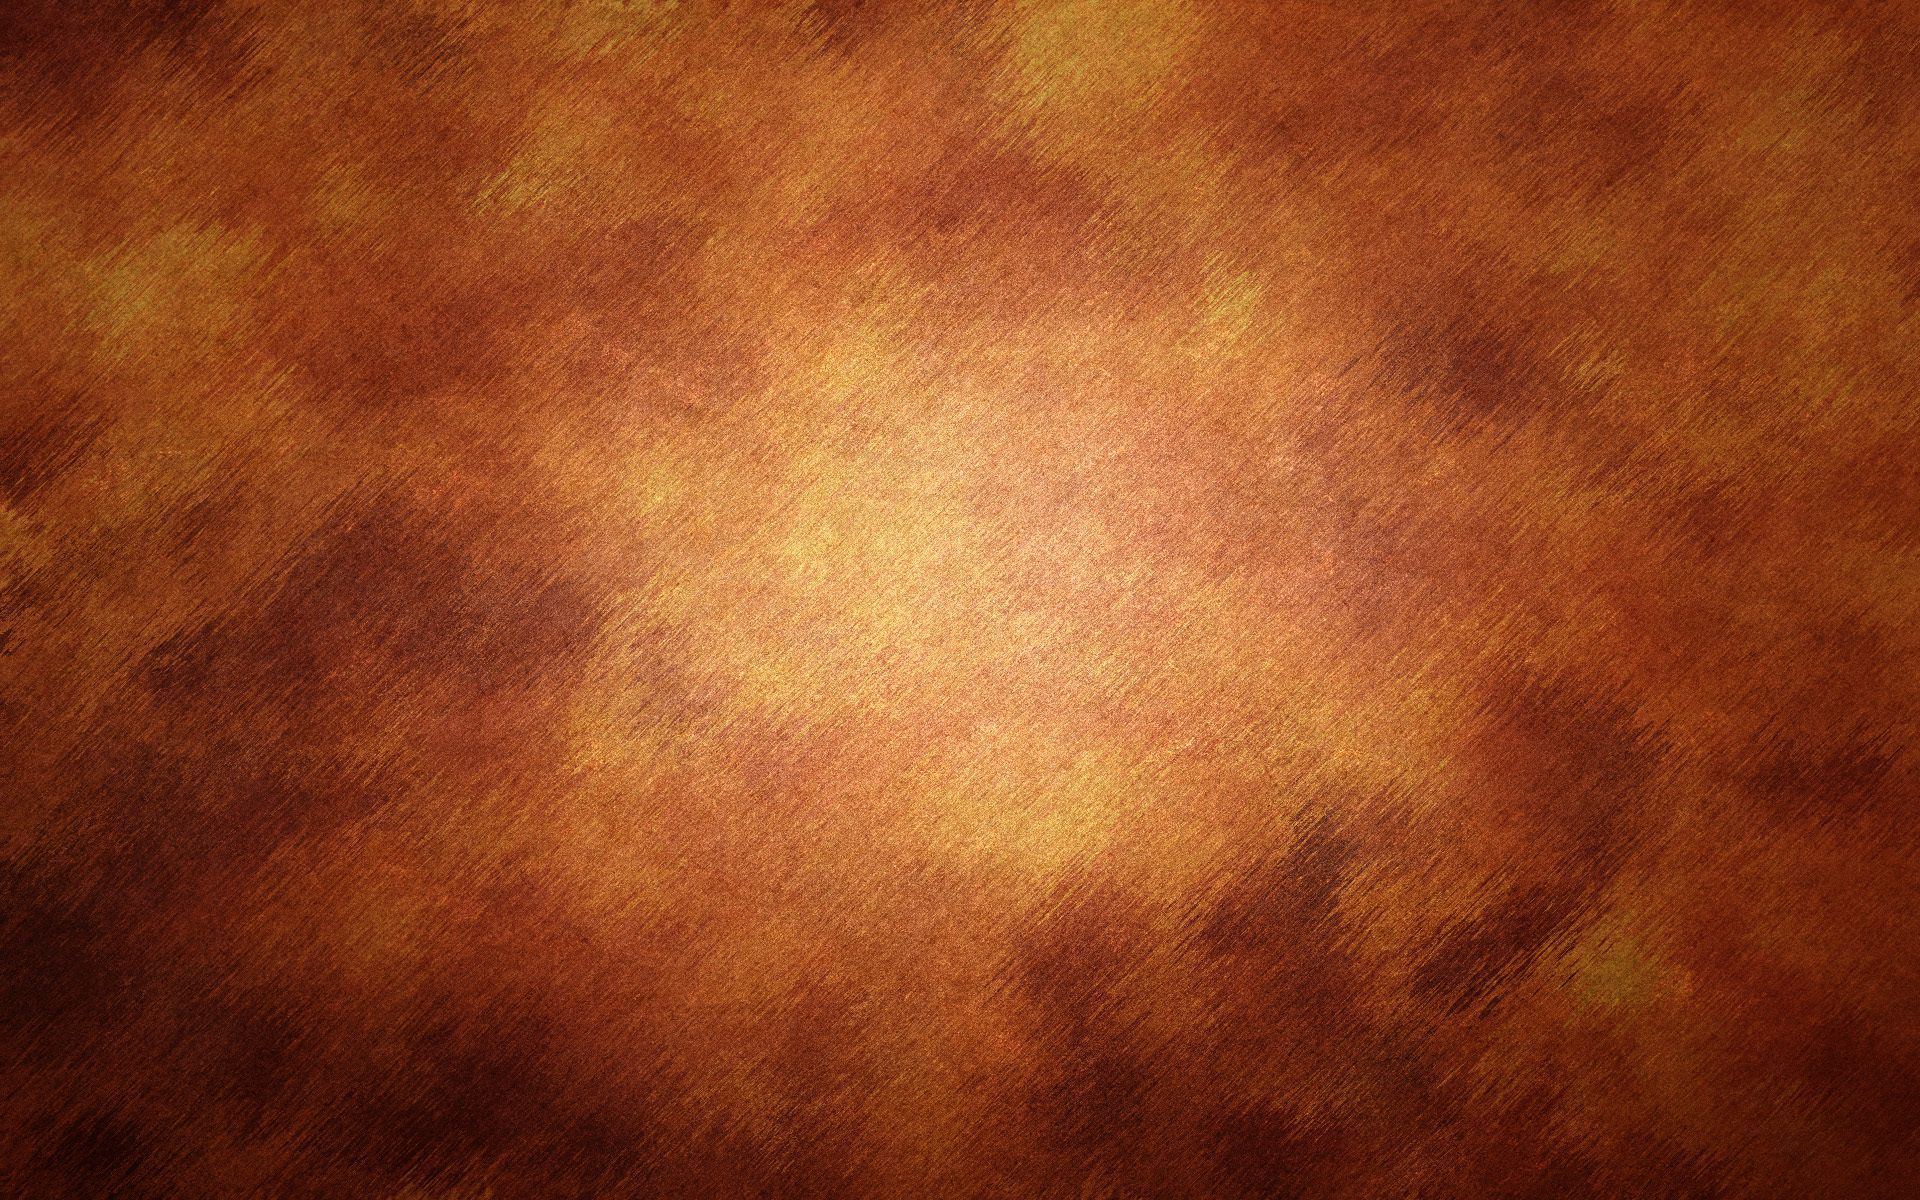 Brown Background Images  Free iPhone  Zoom HD Wallpapers  Vectors   rawpixel